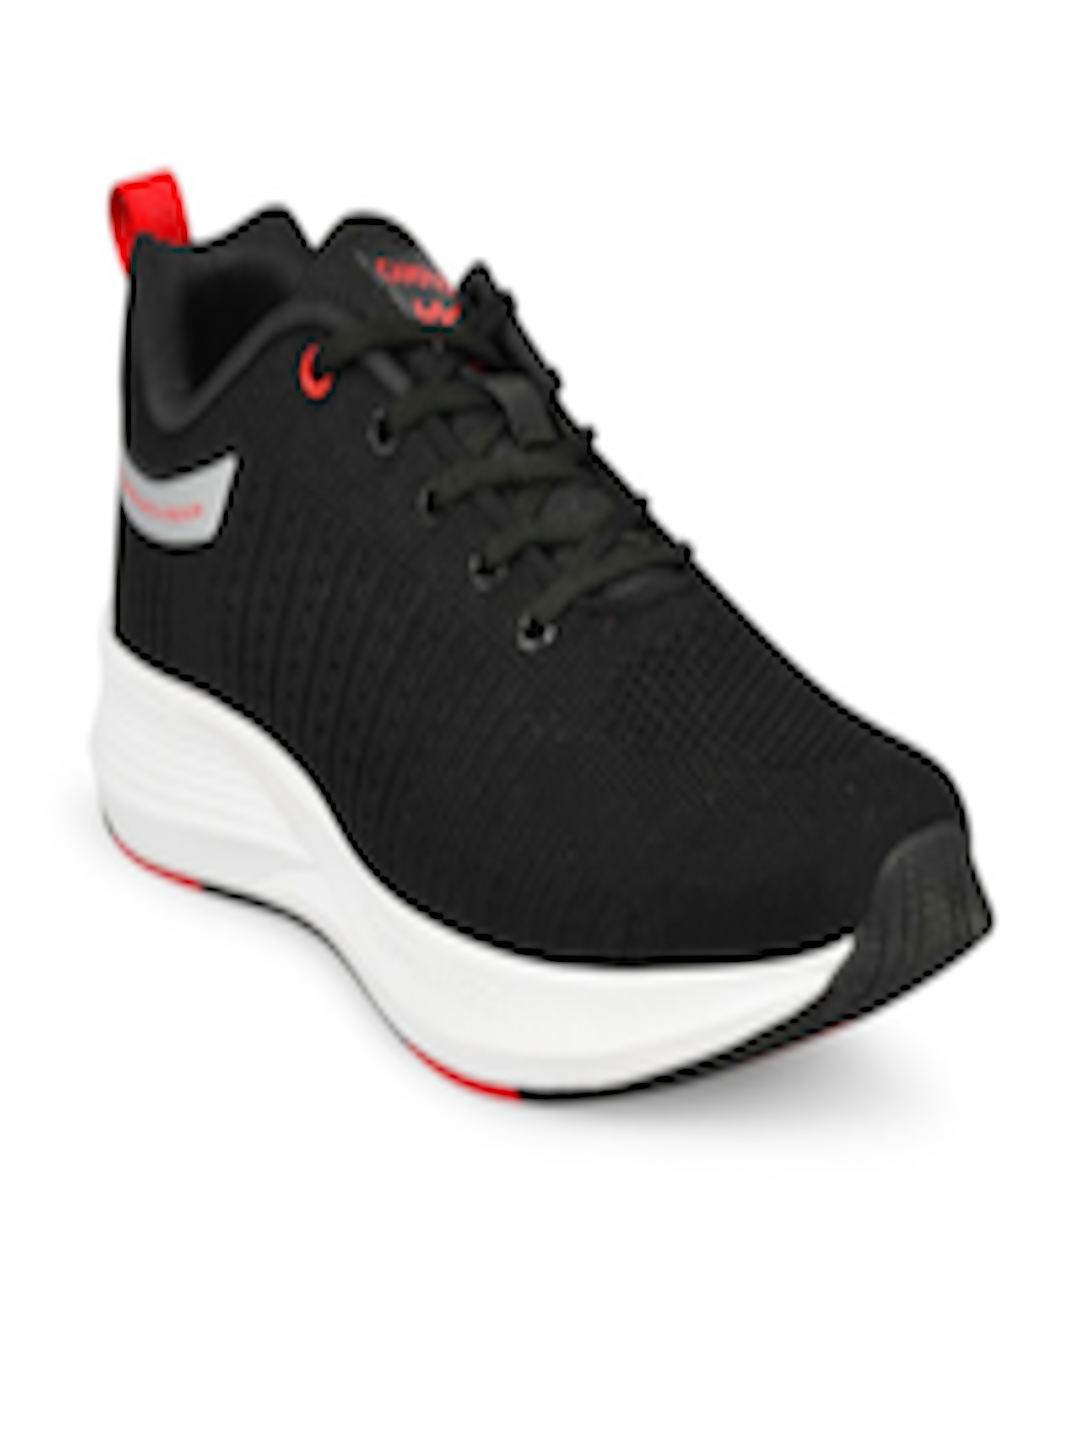 Buy Campus Men Black Mesh Running Non Marking Shoes - Sports Shoes for ...